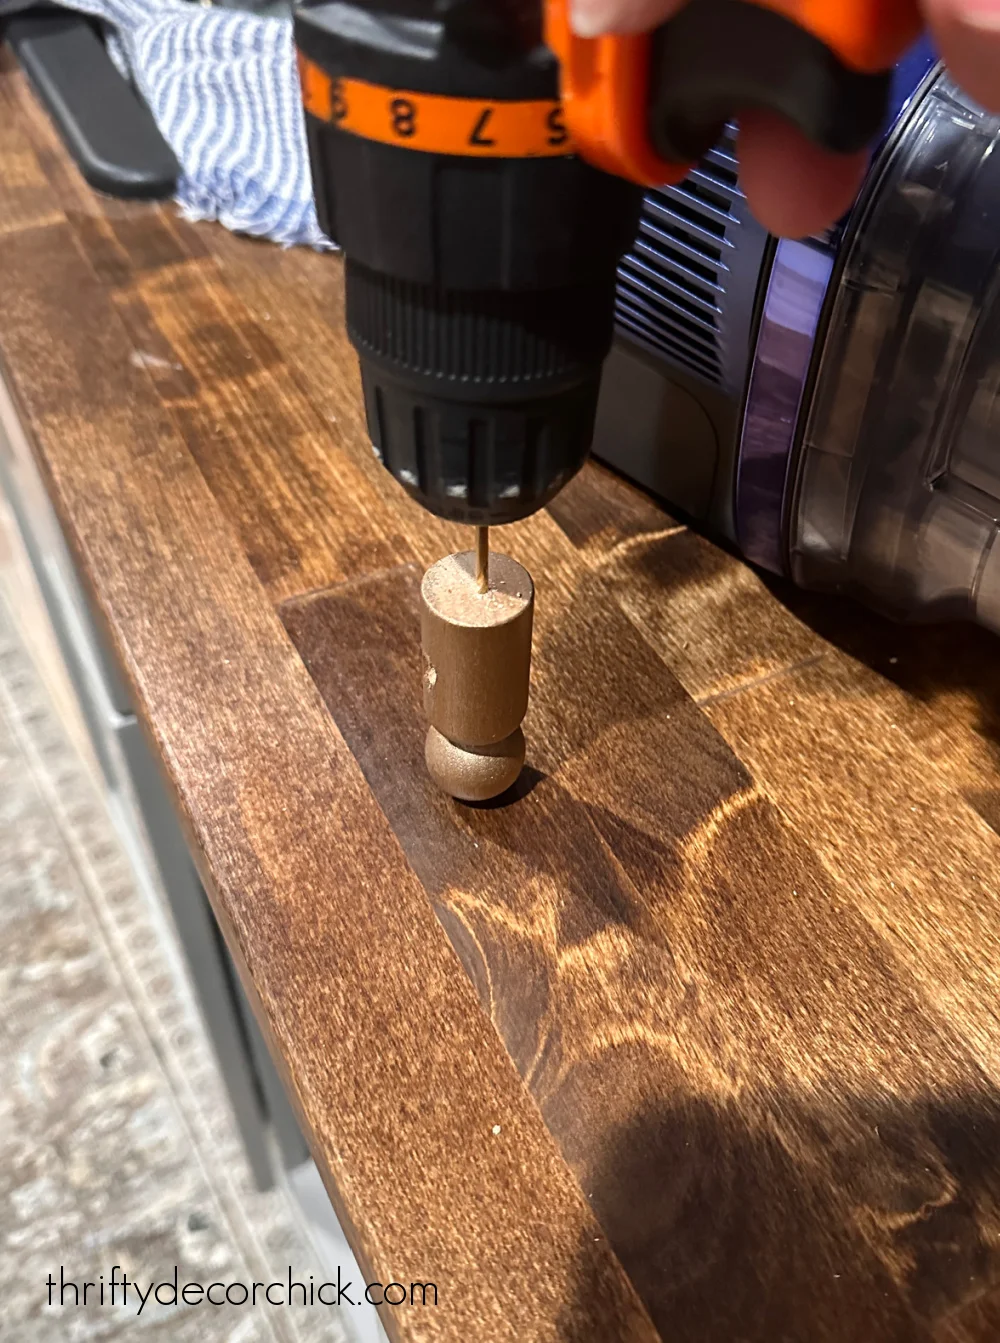 drilling into wood pegs